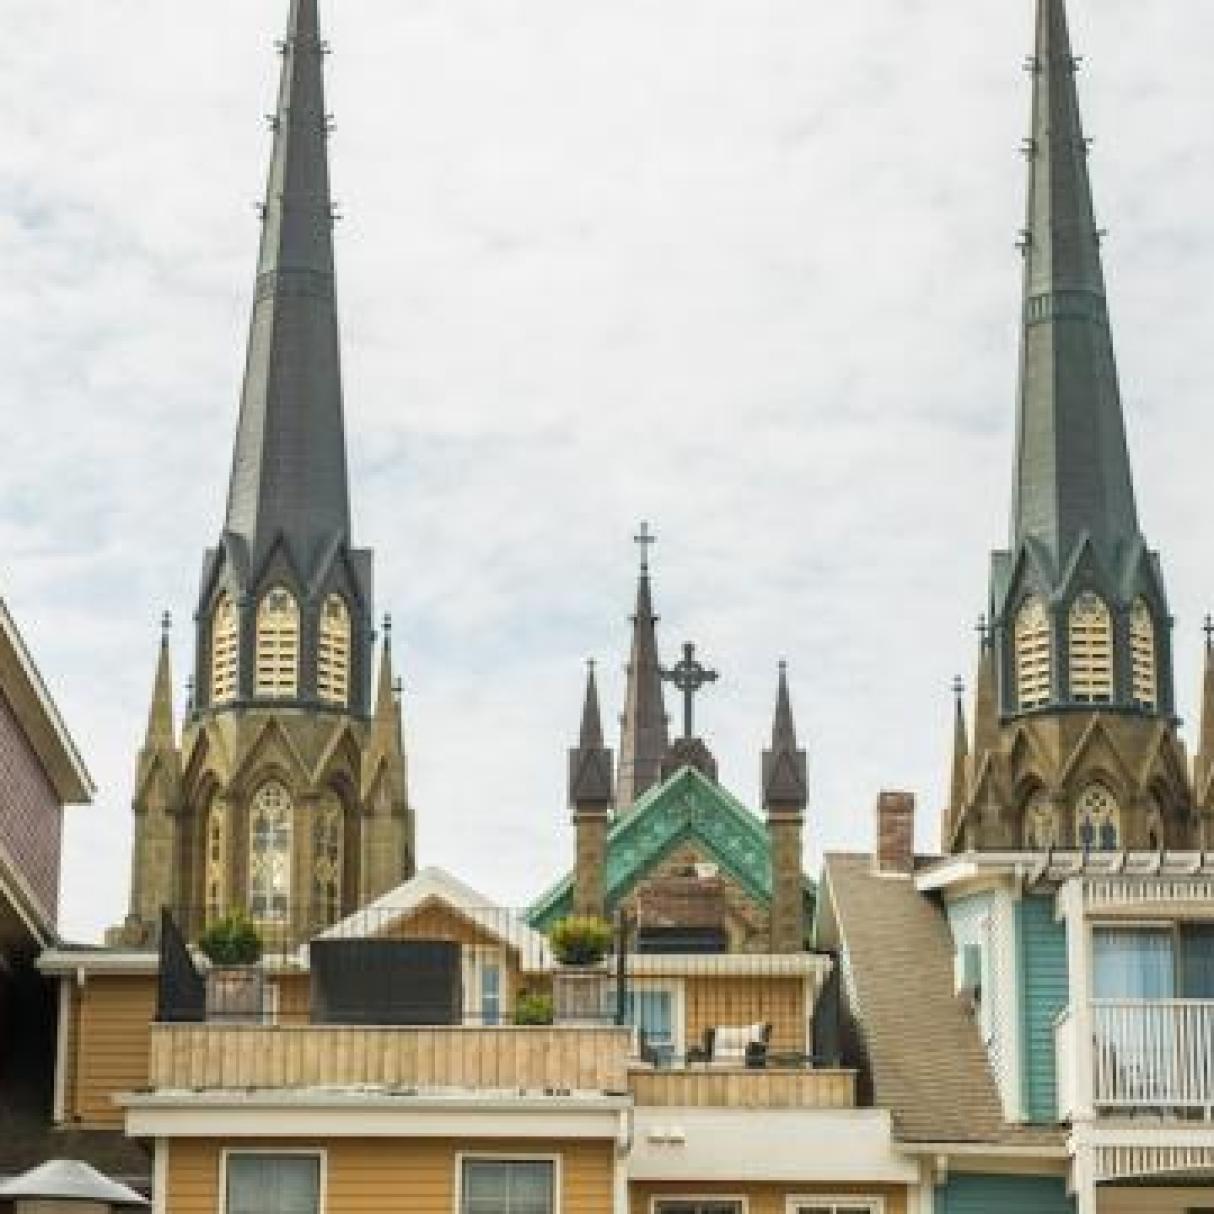 Two church steeples visible above street level in Charlottetown, PEI